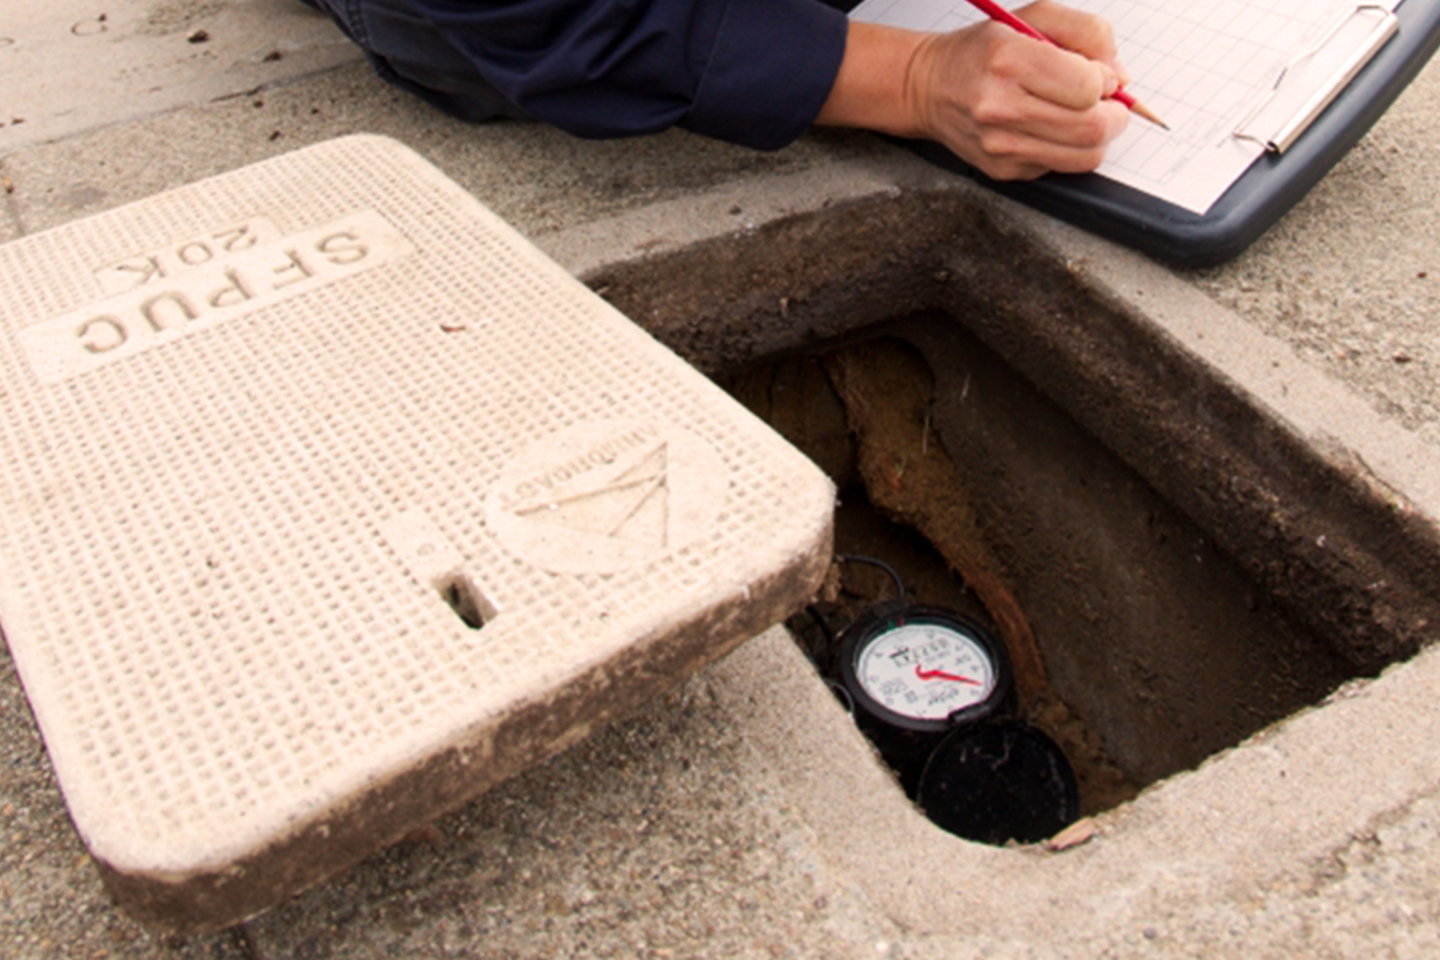 technician opening water meter cover on the sidewalk